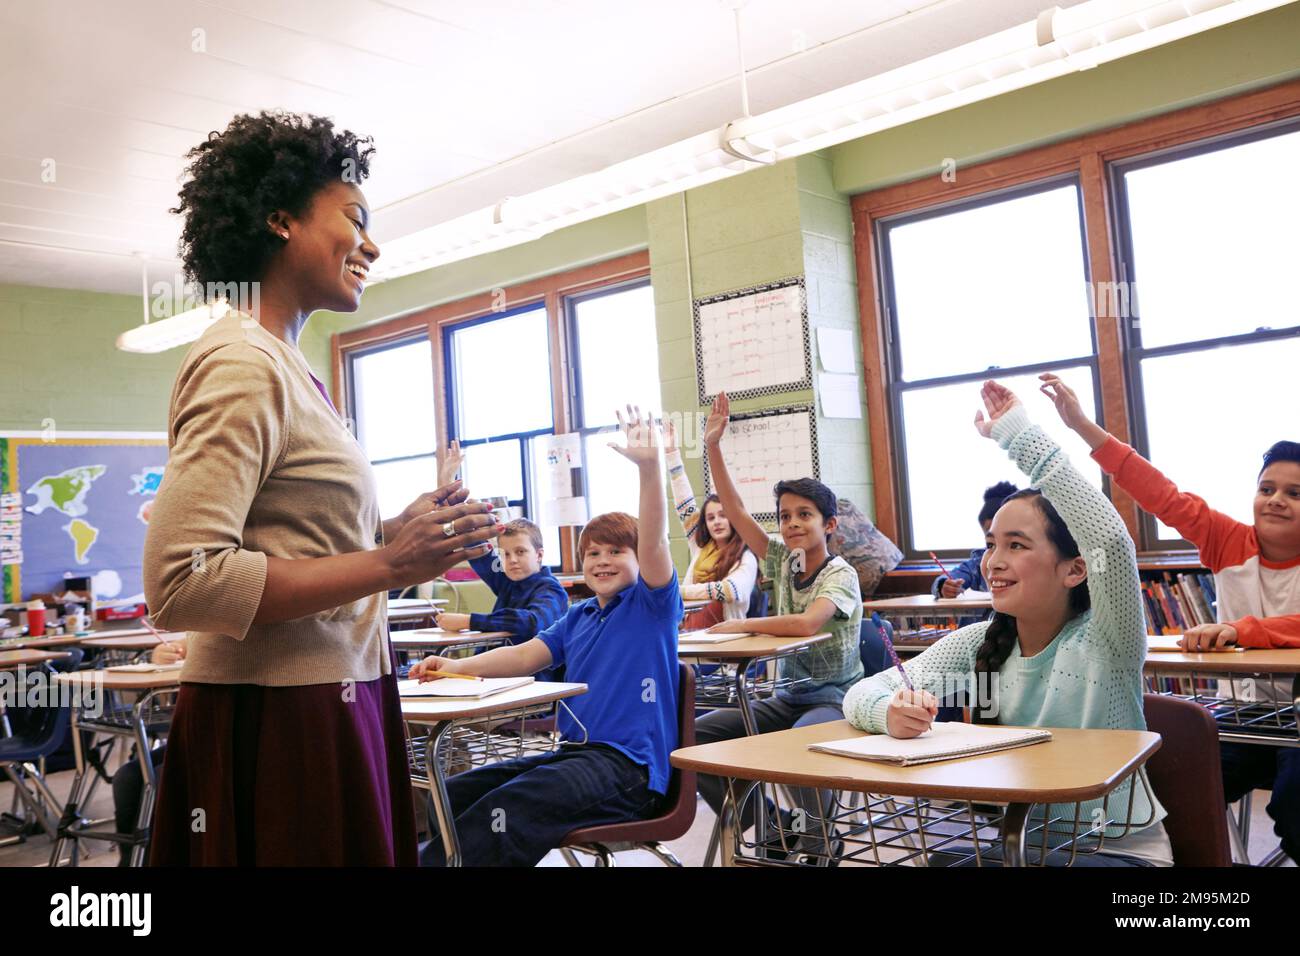 School, teacher and children raise their hands to ask or answer an academic question for learning. Diversity, education and primary school kids Stock Photo